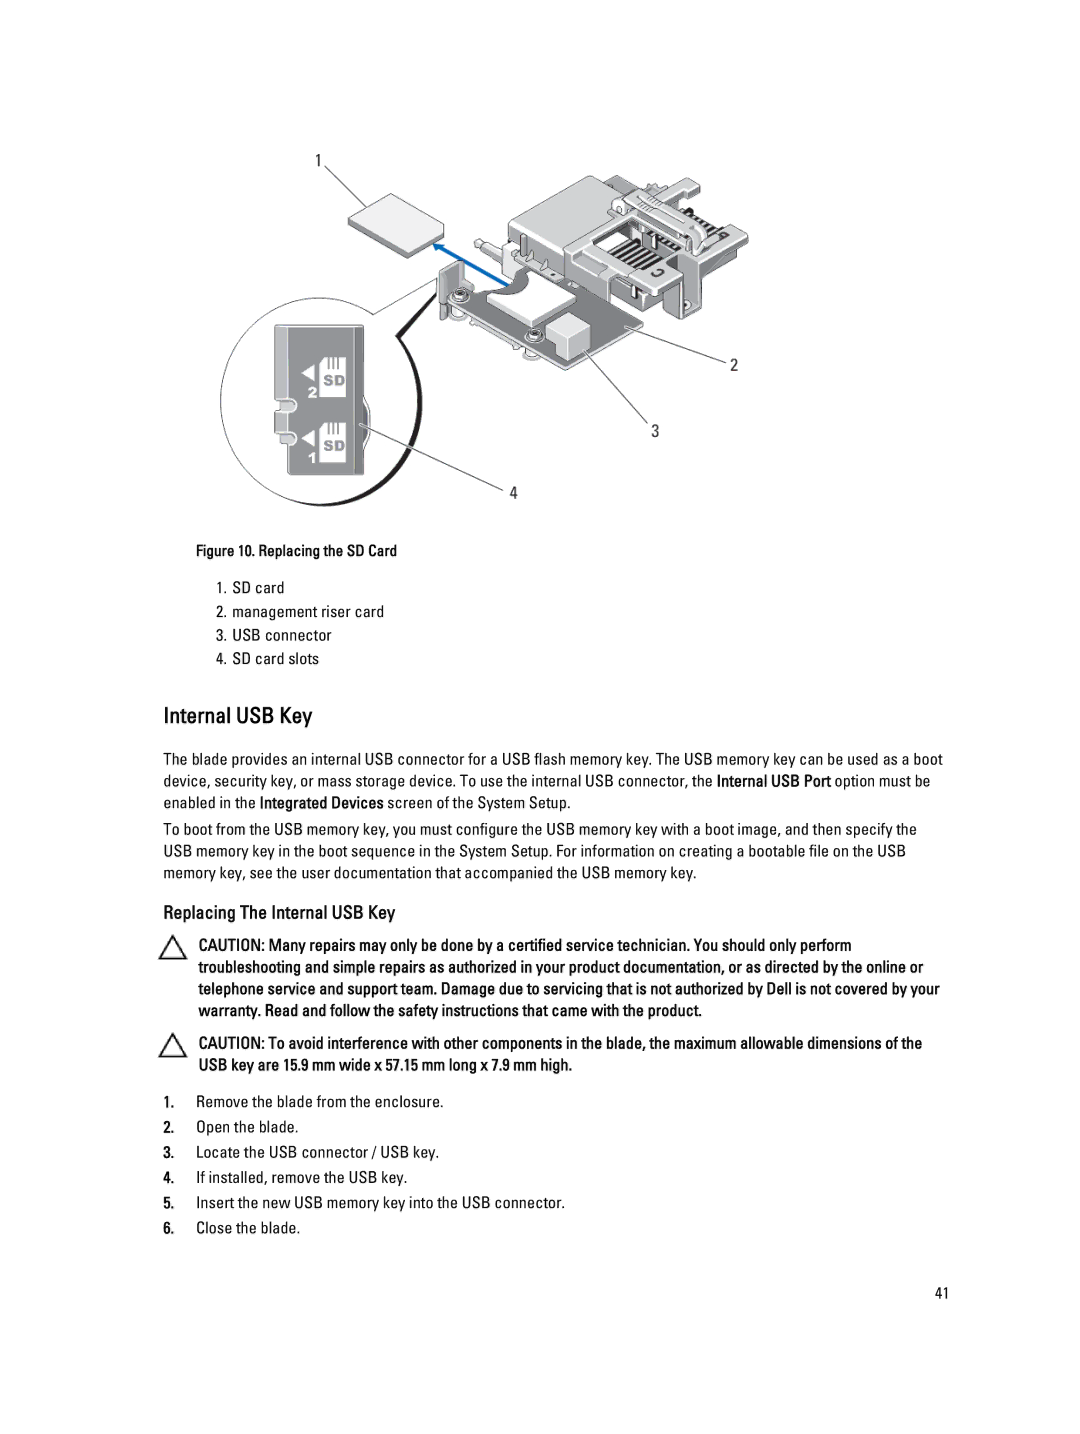 Dell M620 owner manual Replacing The Internal USB Key 